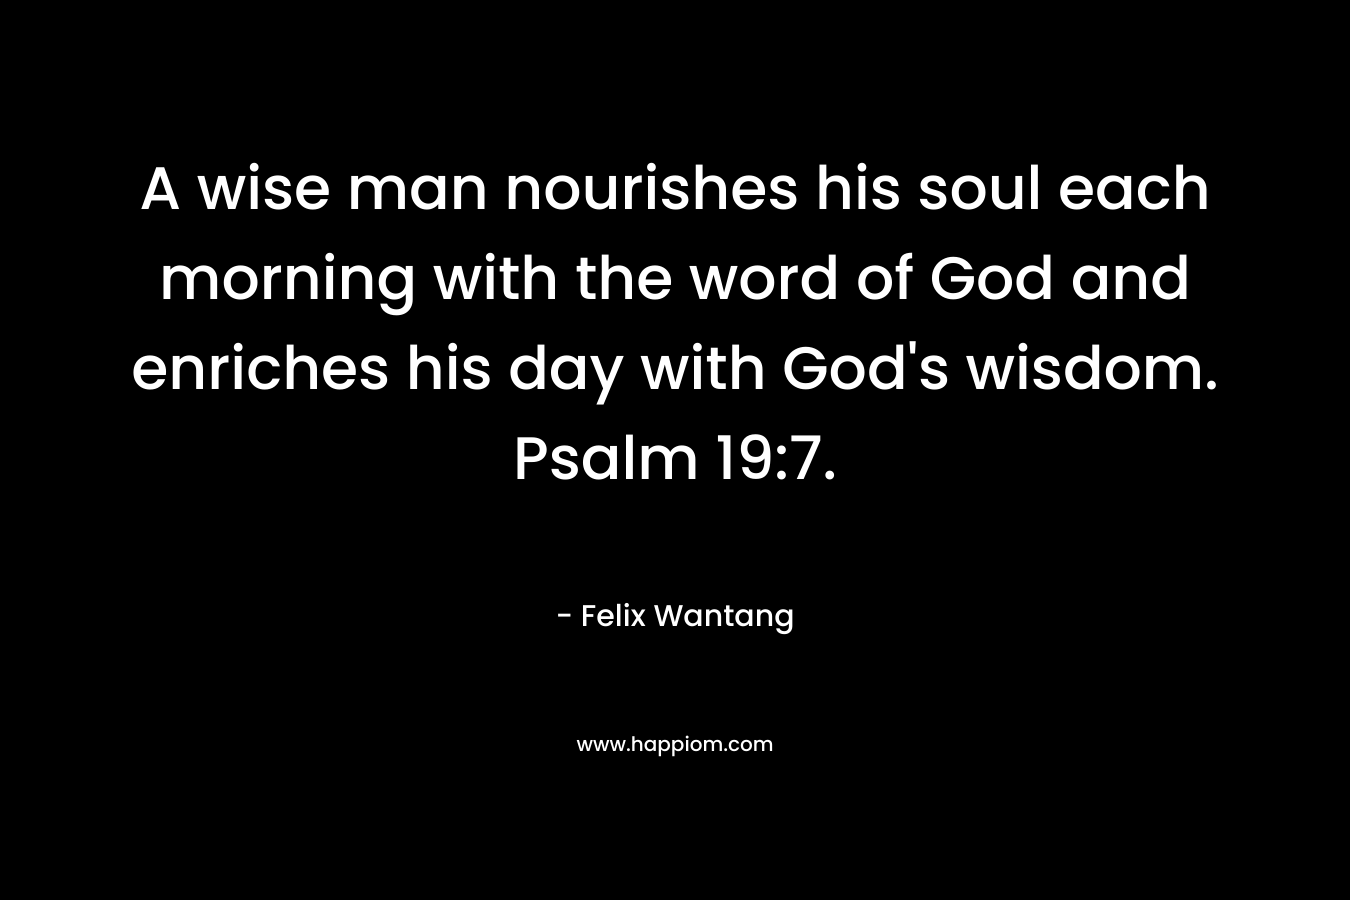 A wise man nourishes his soul each morning with the word of God and enriches his day with God’s wisdom. Psalm 19:7. – Felix Wantang